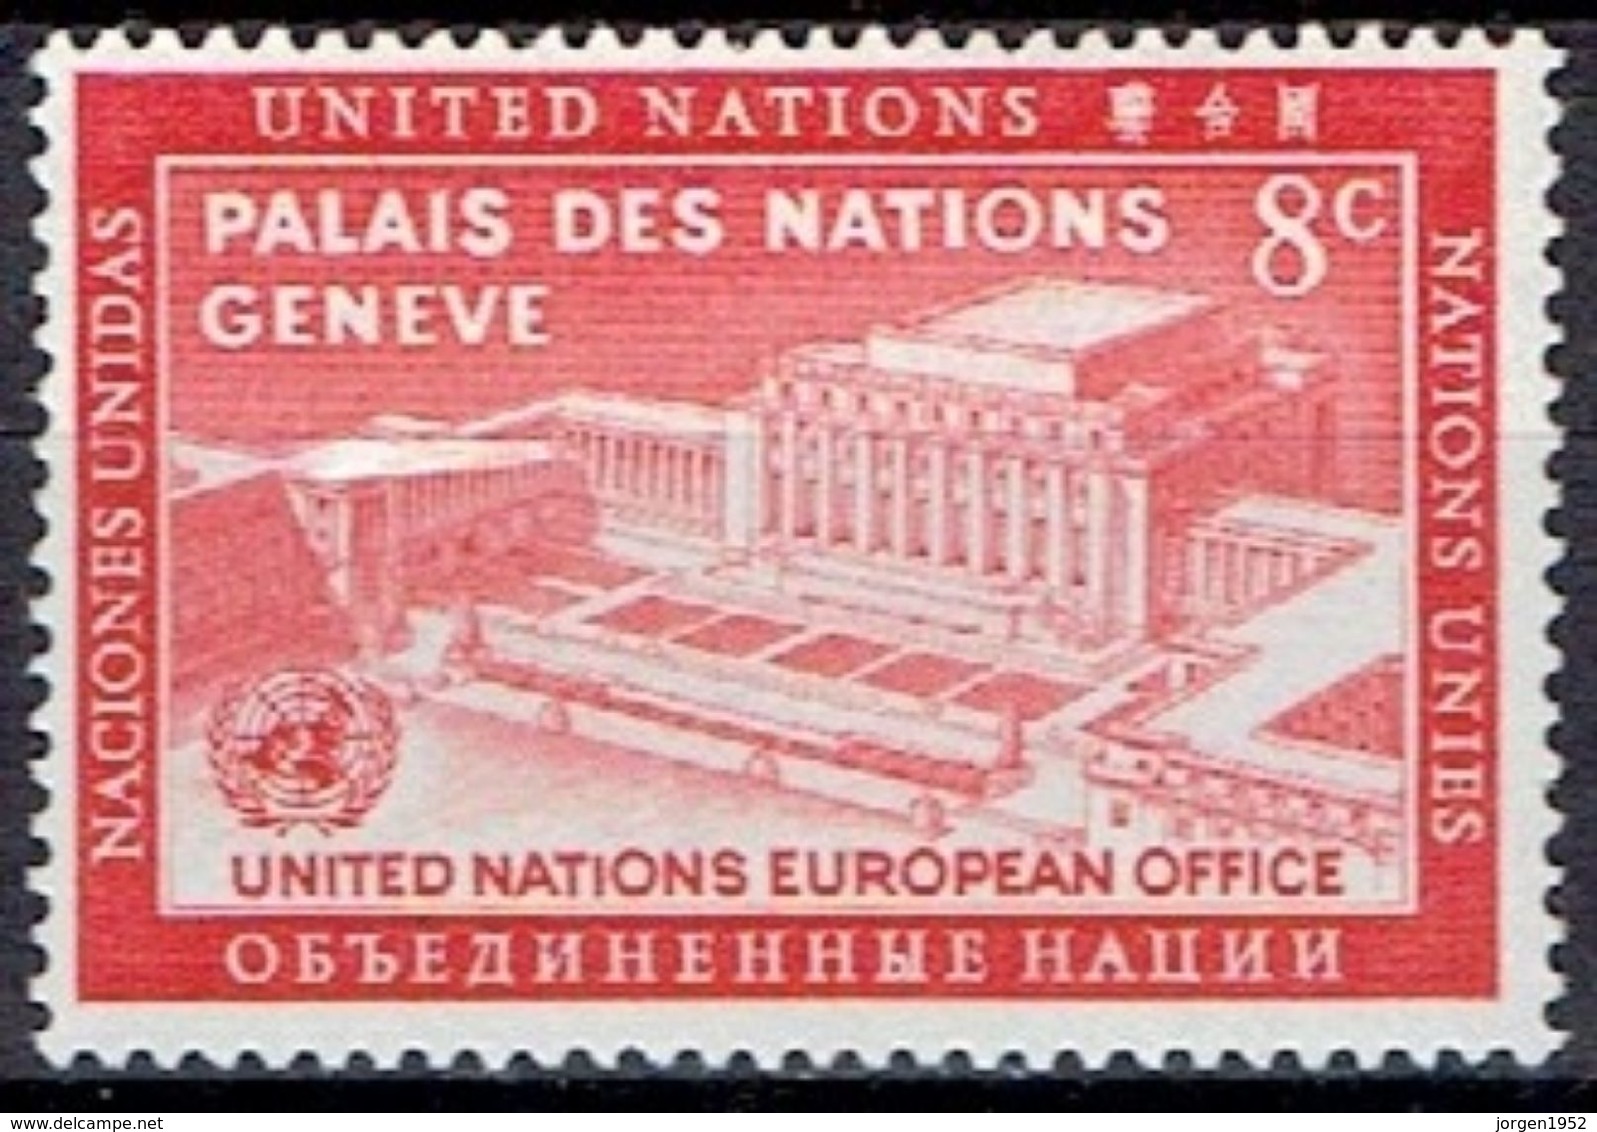 UNITED NATIONS # NEW YORK FROM 1954 STAMPWORLD 30* - Nuevos